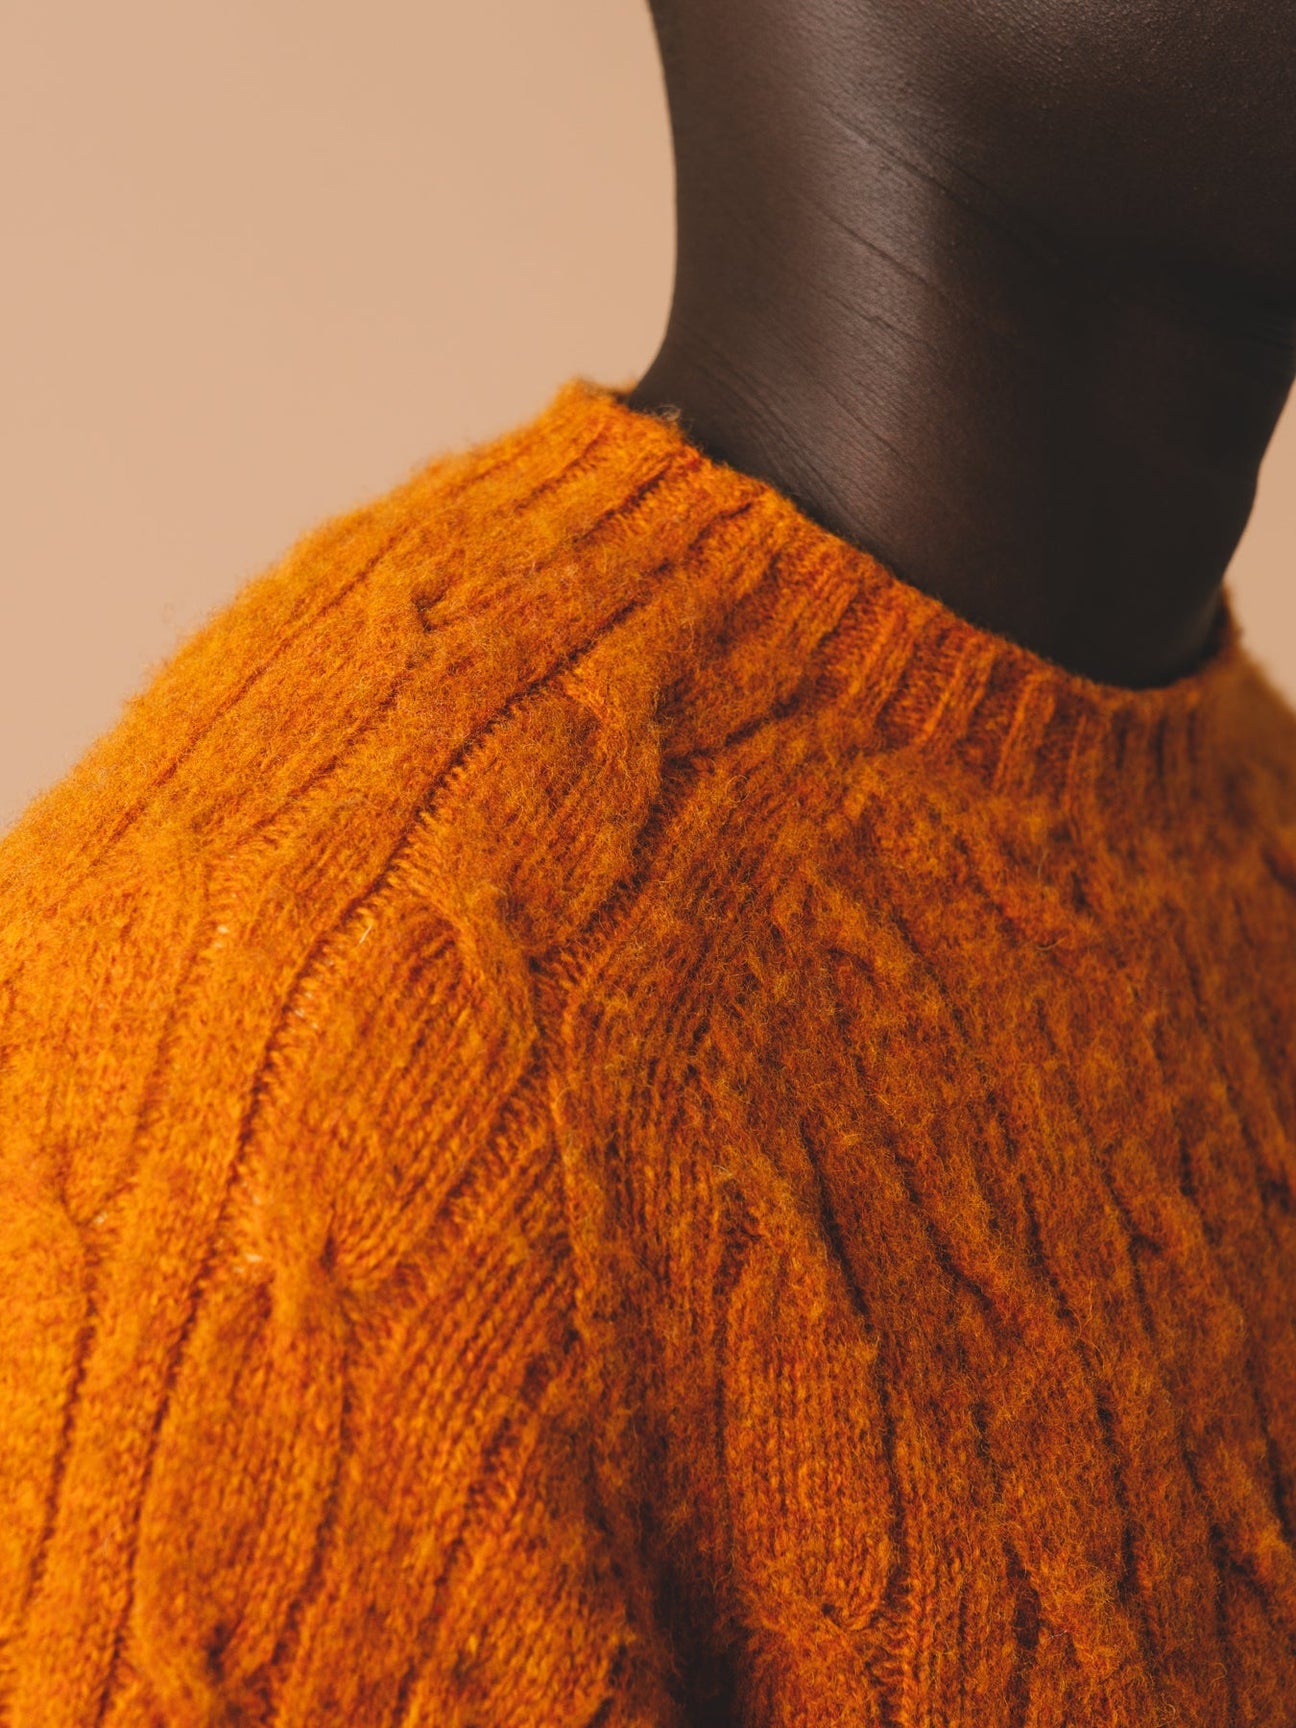 A man wearing a Scottish cable knit sweater in orange.